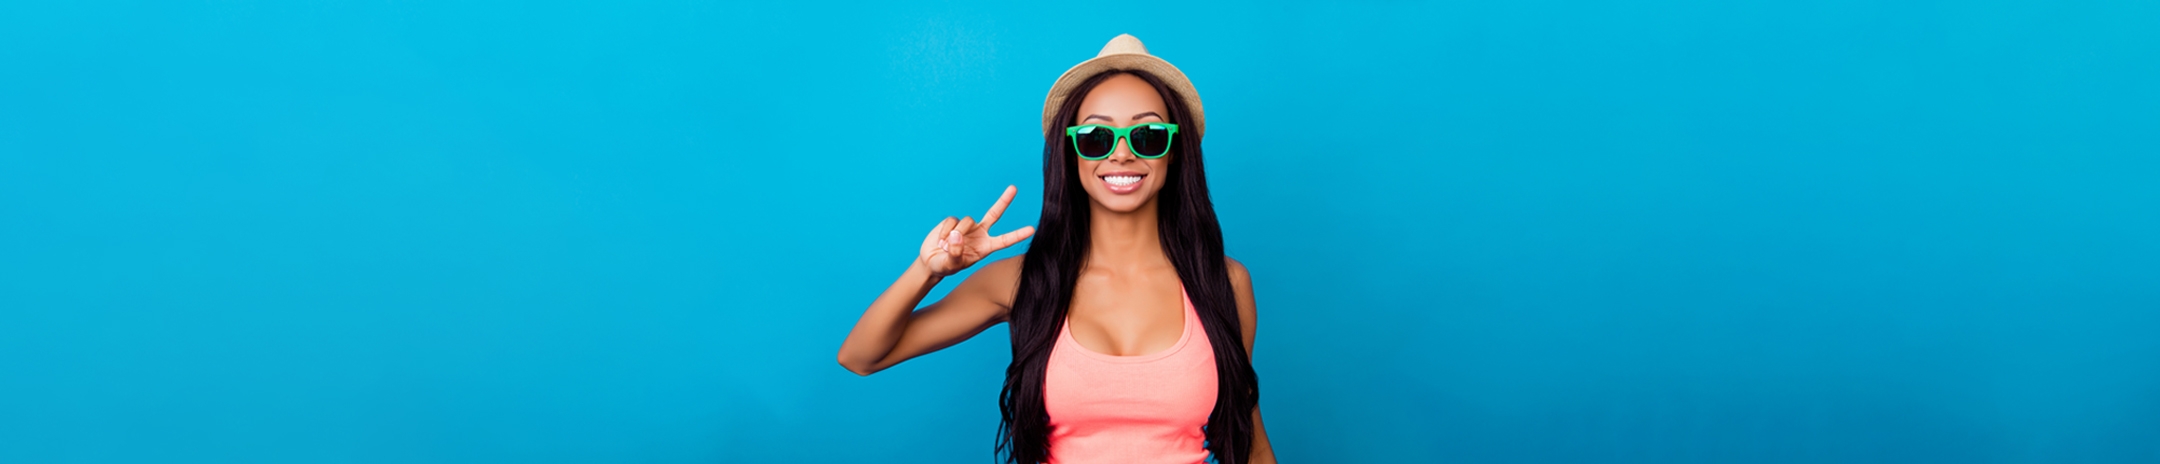 A woman in a pink shirt and green sunglasses, making the peace sign in front of a gradient blue background.